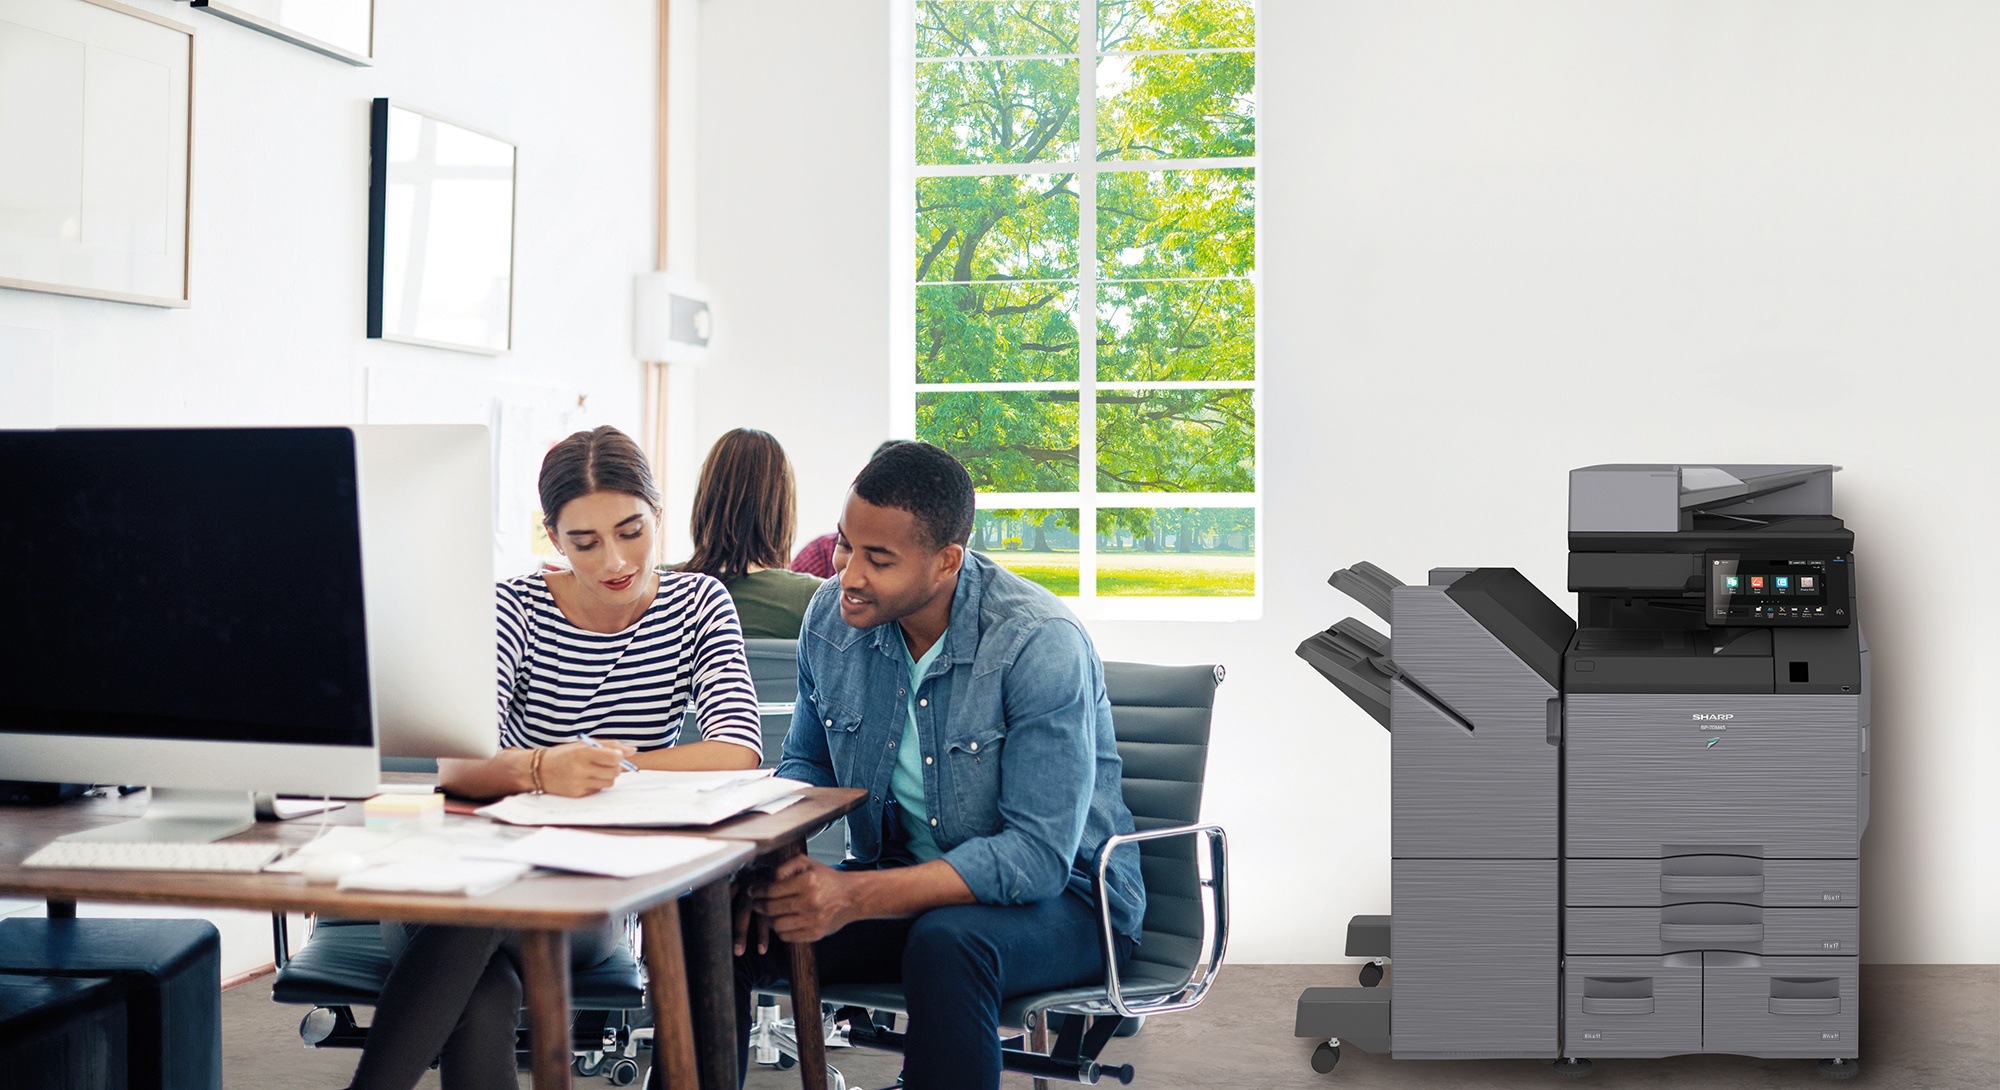 SHARP’s Multi-functional Printers (MFPs) are designed to enhance efficiency